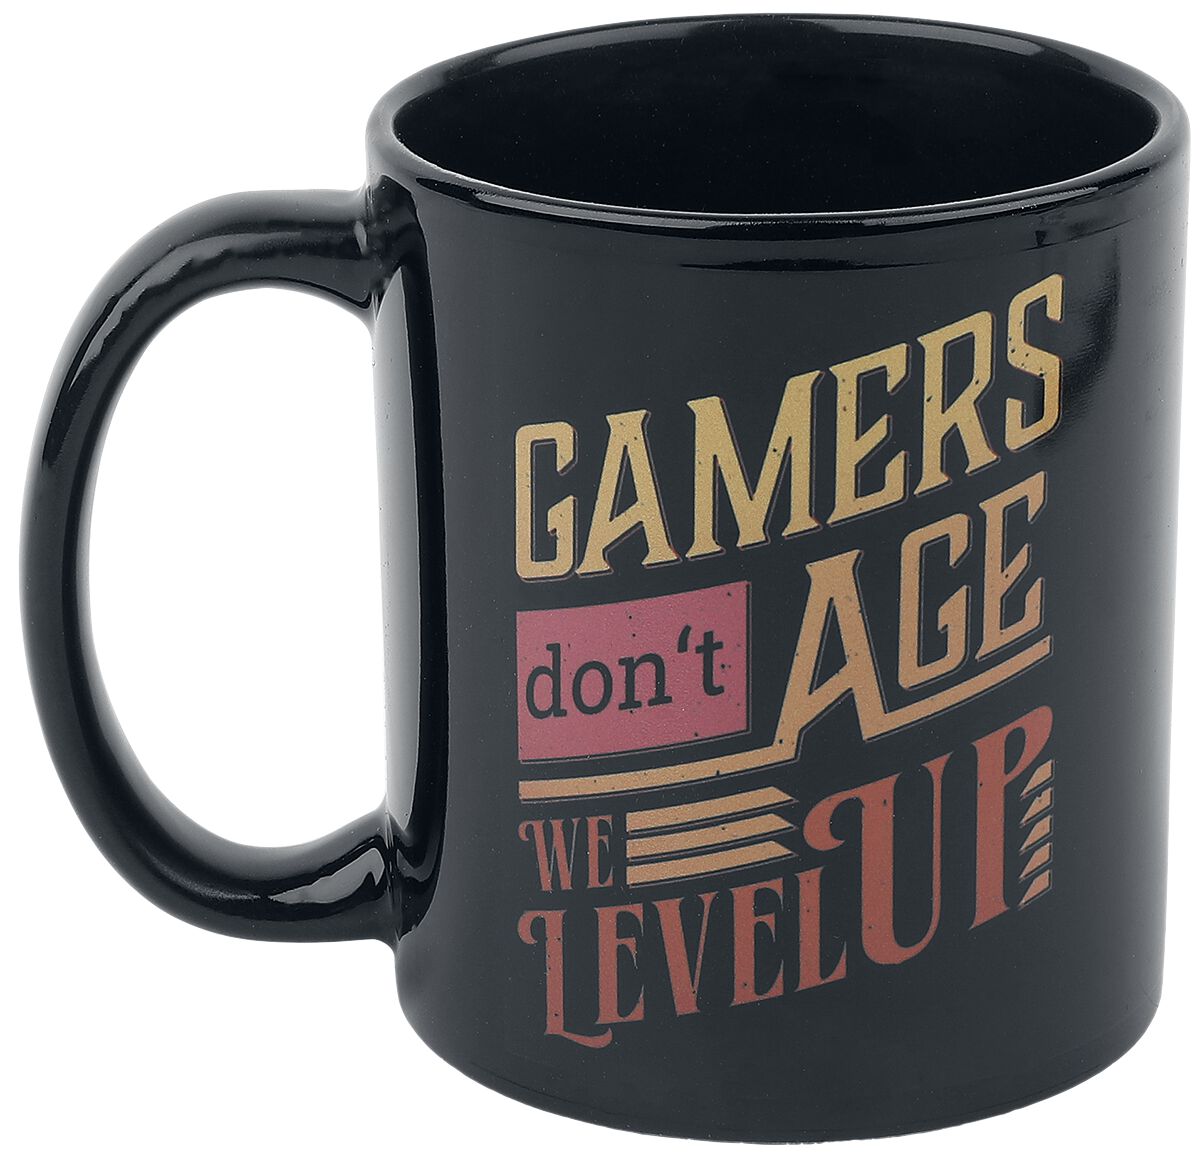 Slogans Gamers Don't Age - We Level Up Cup black